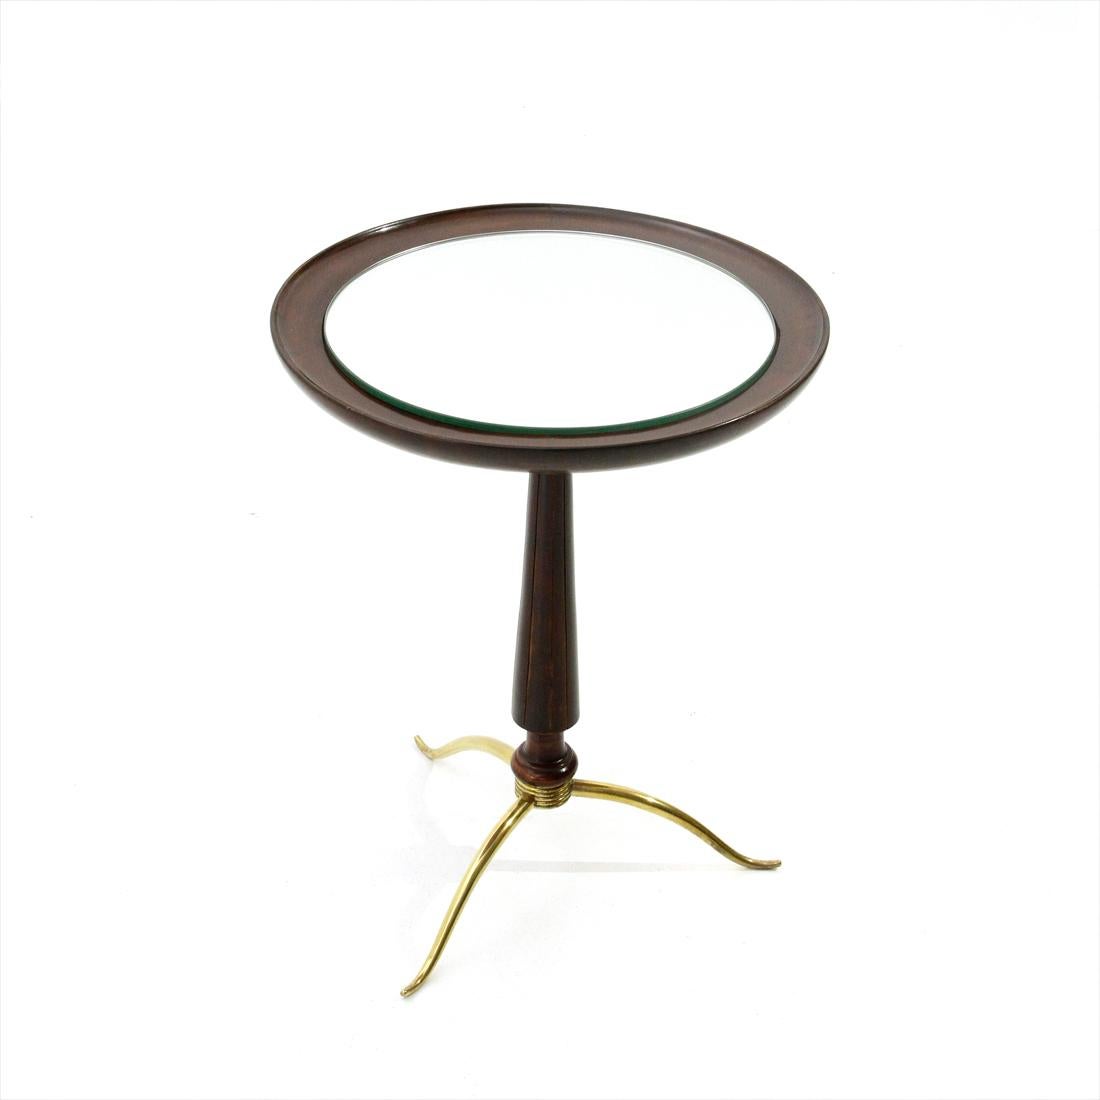 Italian manufacture table produced in the 1940s.
Wooden top and mirrored glass.
Shaped wooden stem.
Brass foot.
Good general conditions, some signs due to normal use over time.

Dimensions: Diameter 38 cm, height 49 cm.